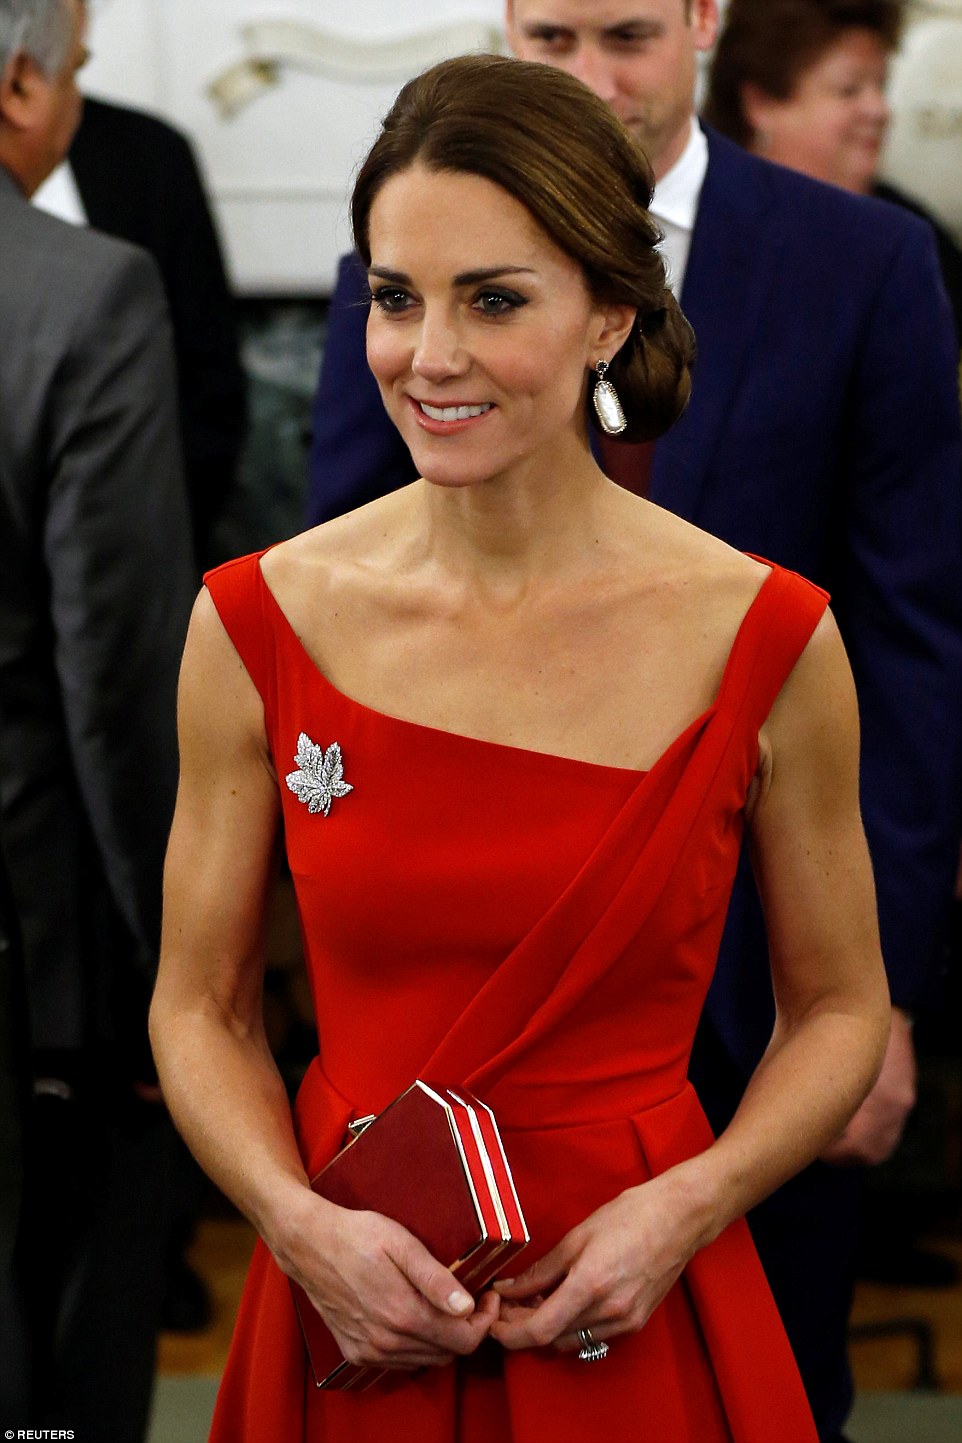 Shining example: Kate accessorised with a stunning broach paying homage to the Canadian flag and a matching red clutch bag as she turned heads at the reception